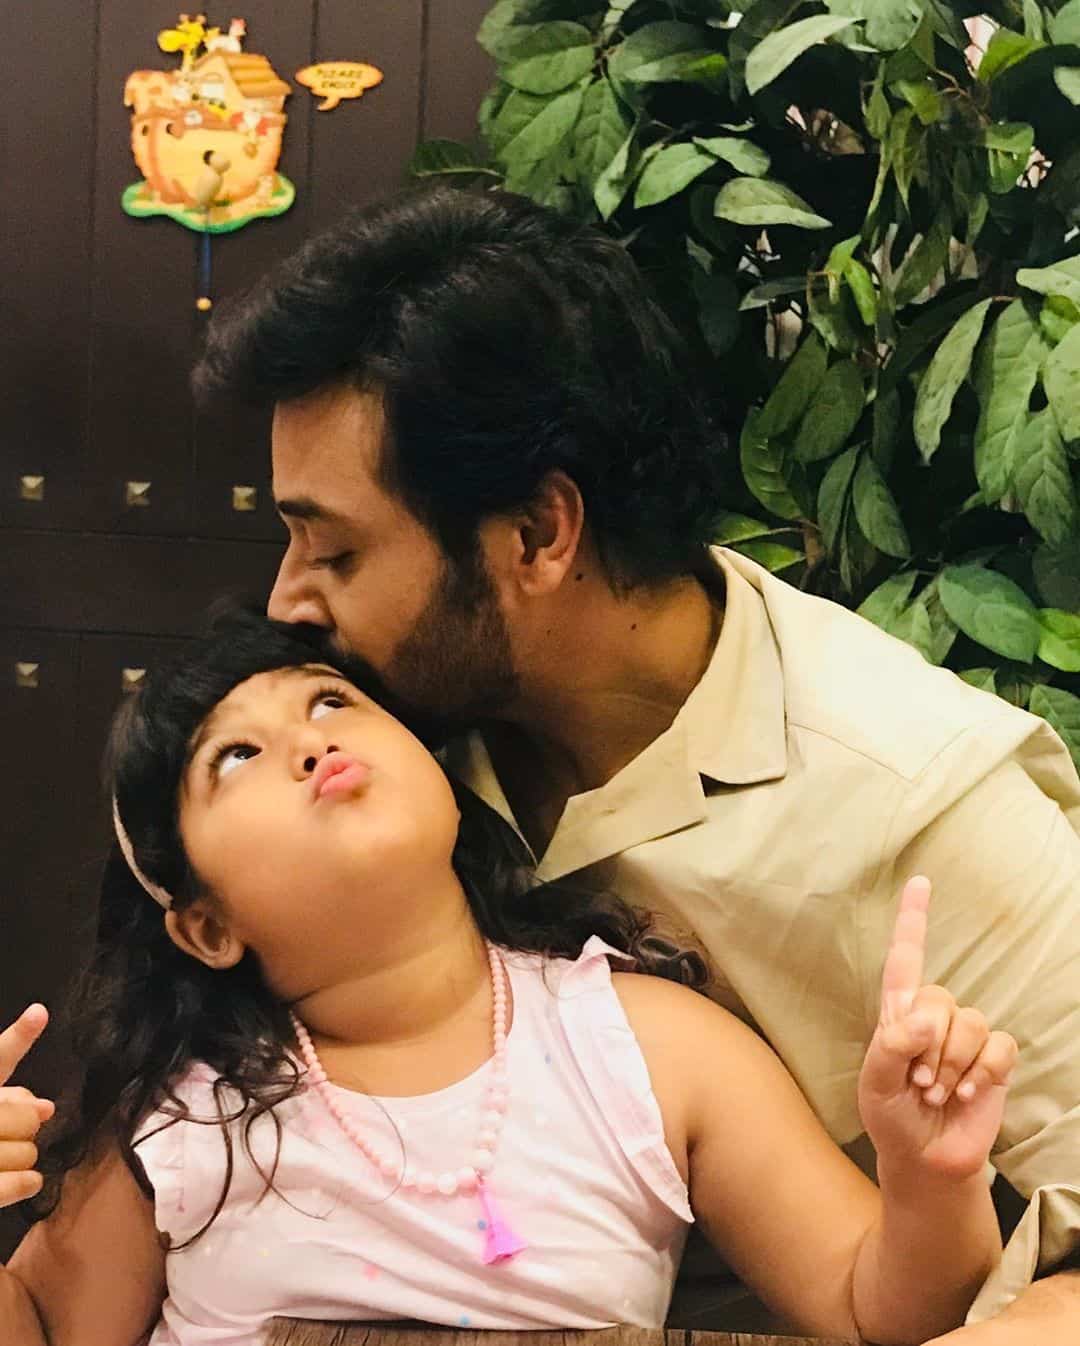 Latest Pictures of Faysal Qureshi with his Wife Sana and Daughter Ayat